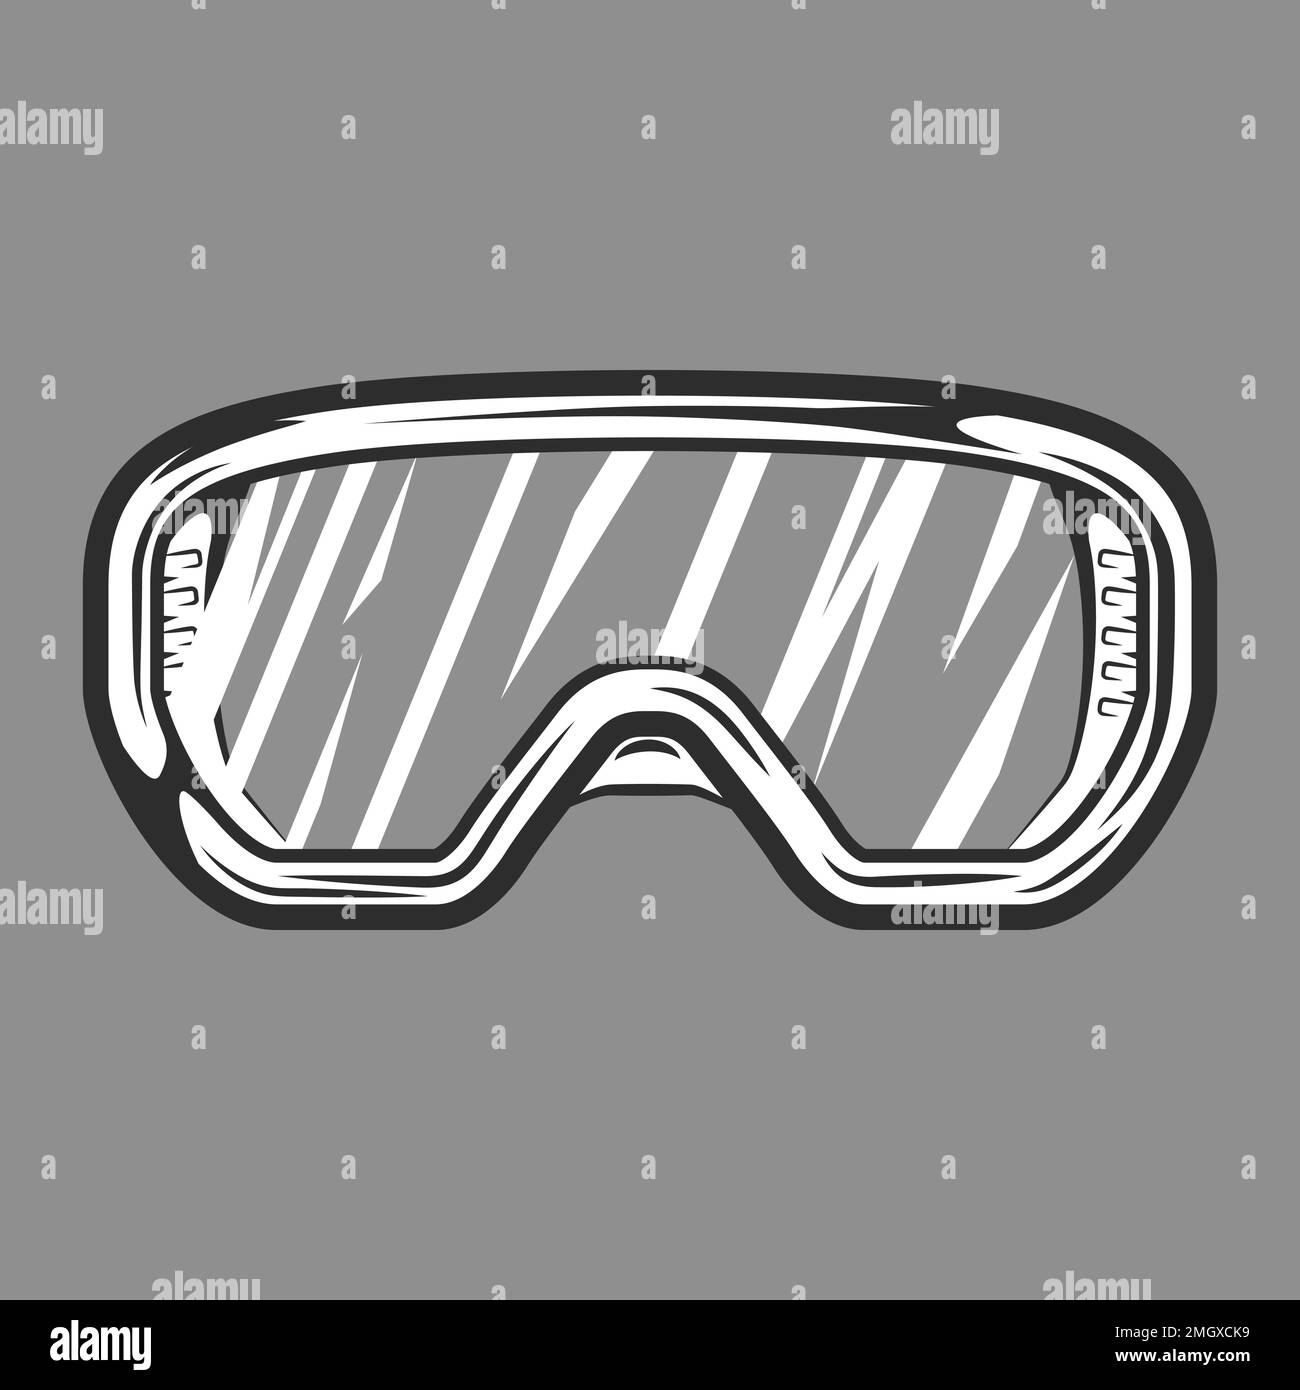 New Construction safety glasses vintage concept vector illustration isolated on gray background Stock Vector